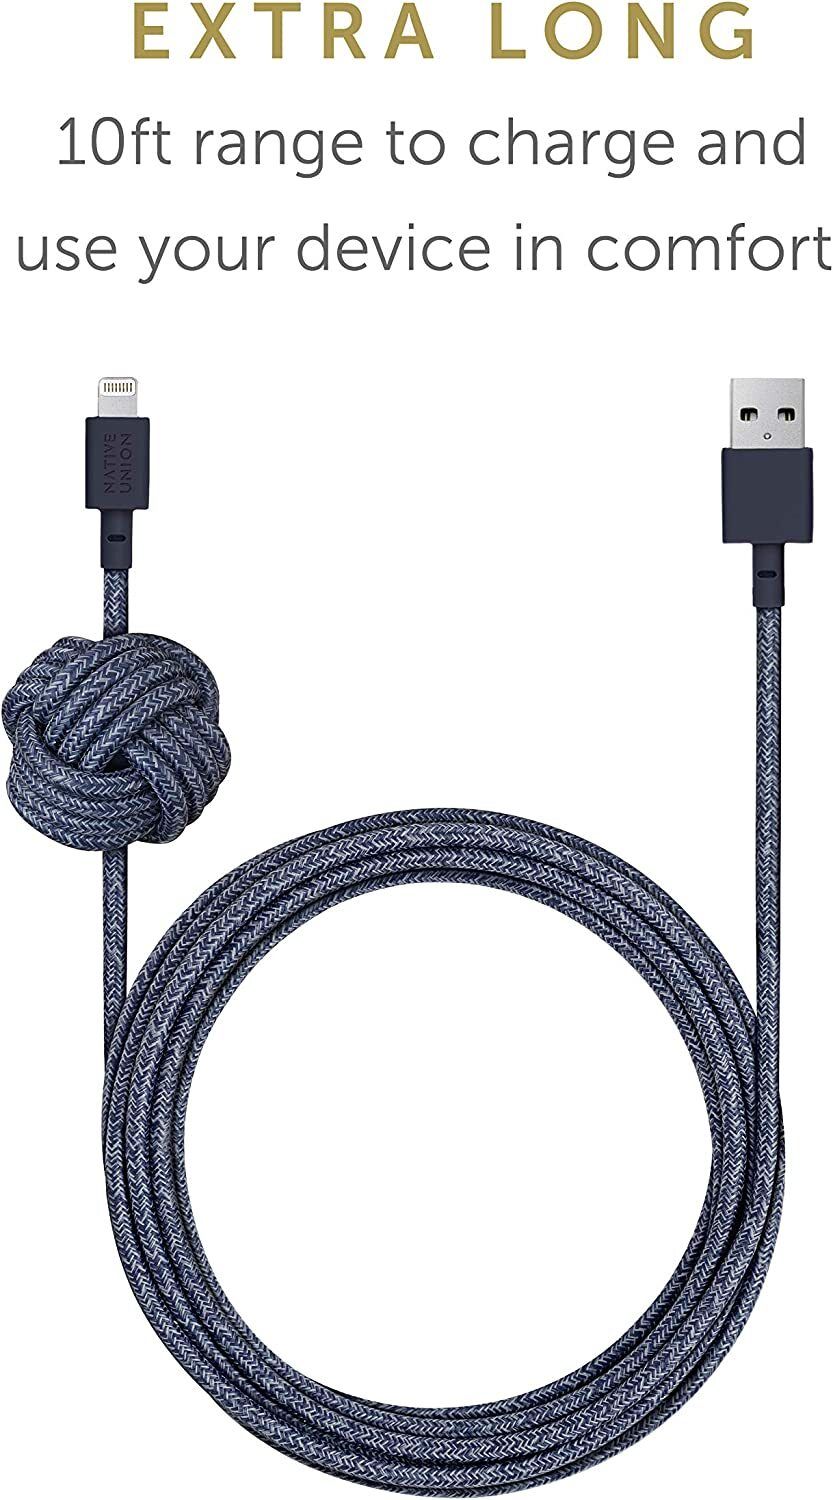 Native Union knotted weight 10-foot cable